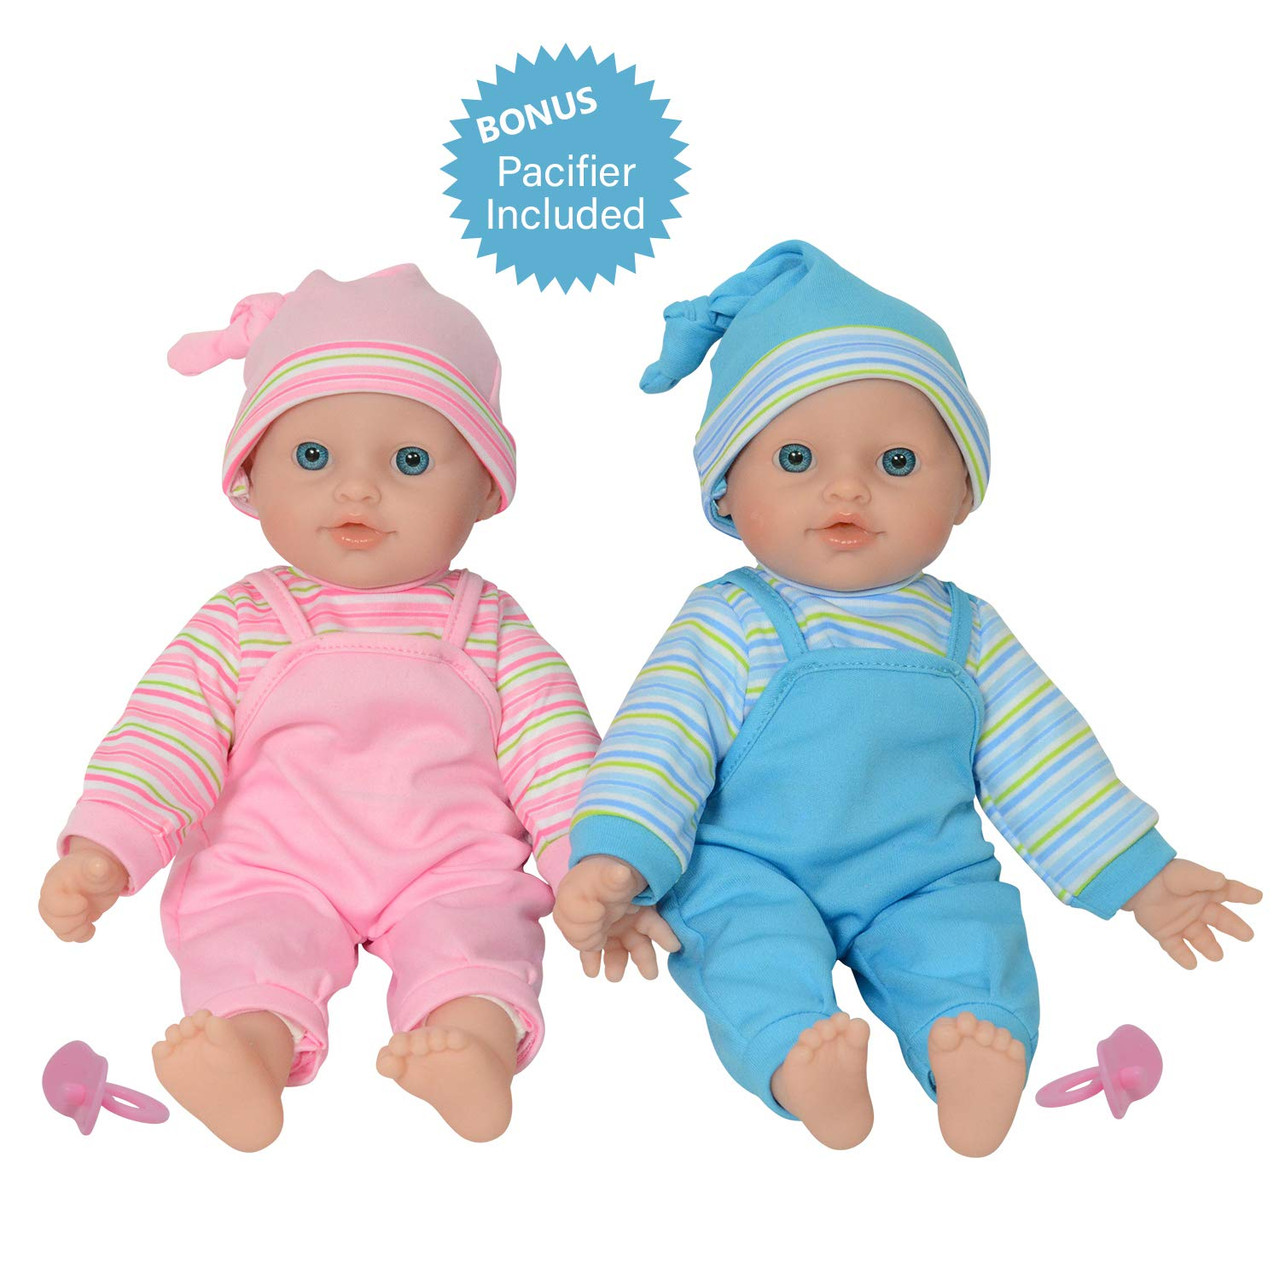 soft baby doll toy